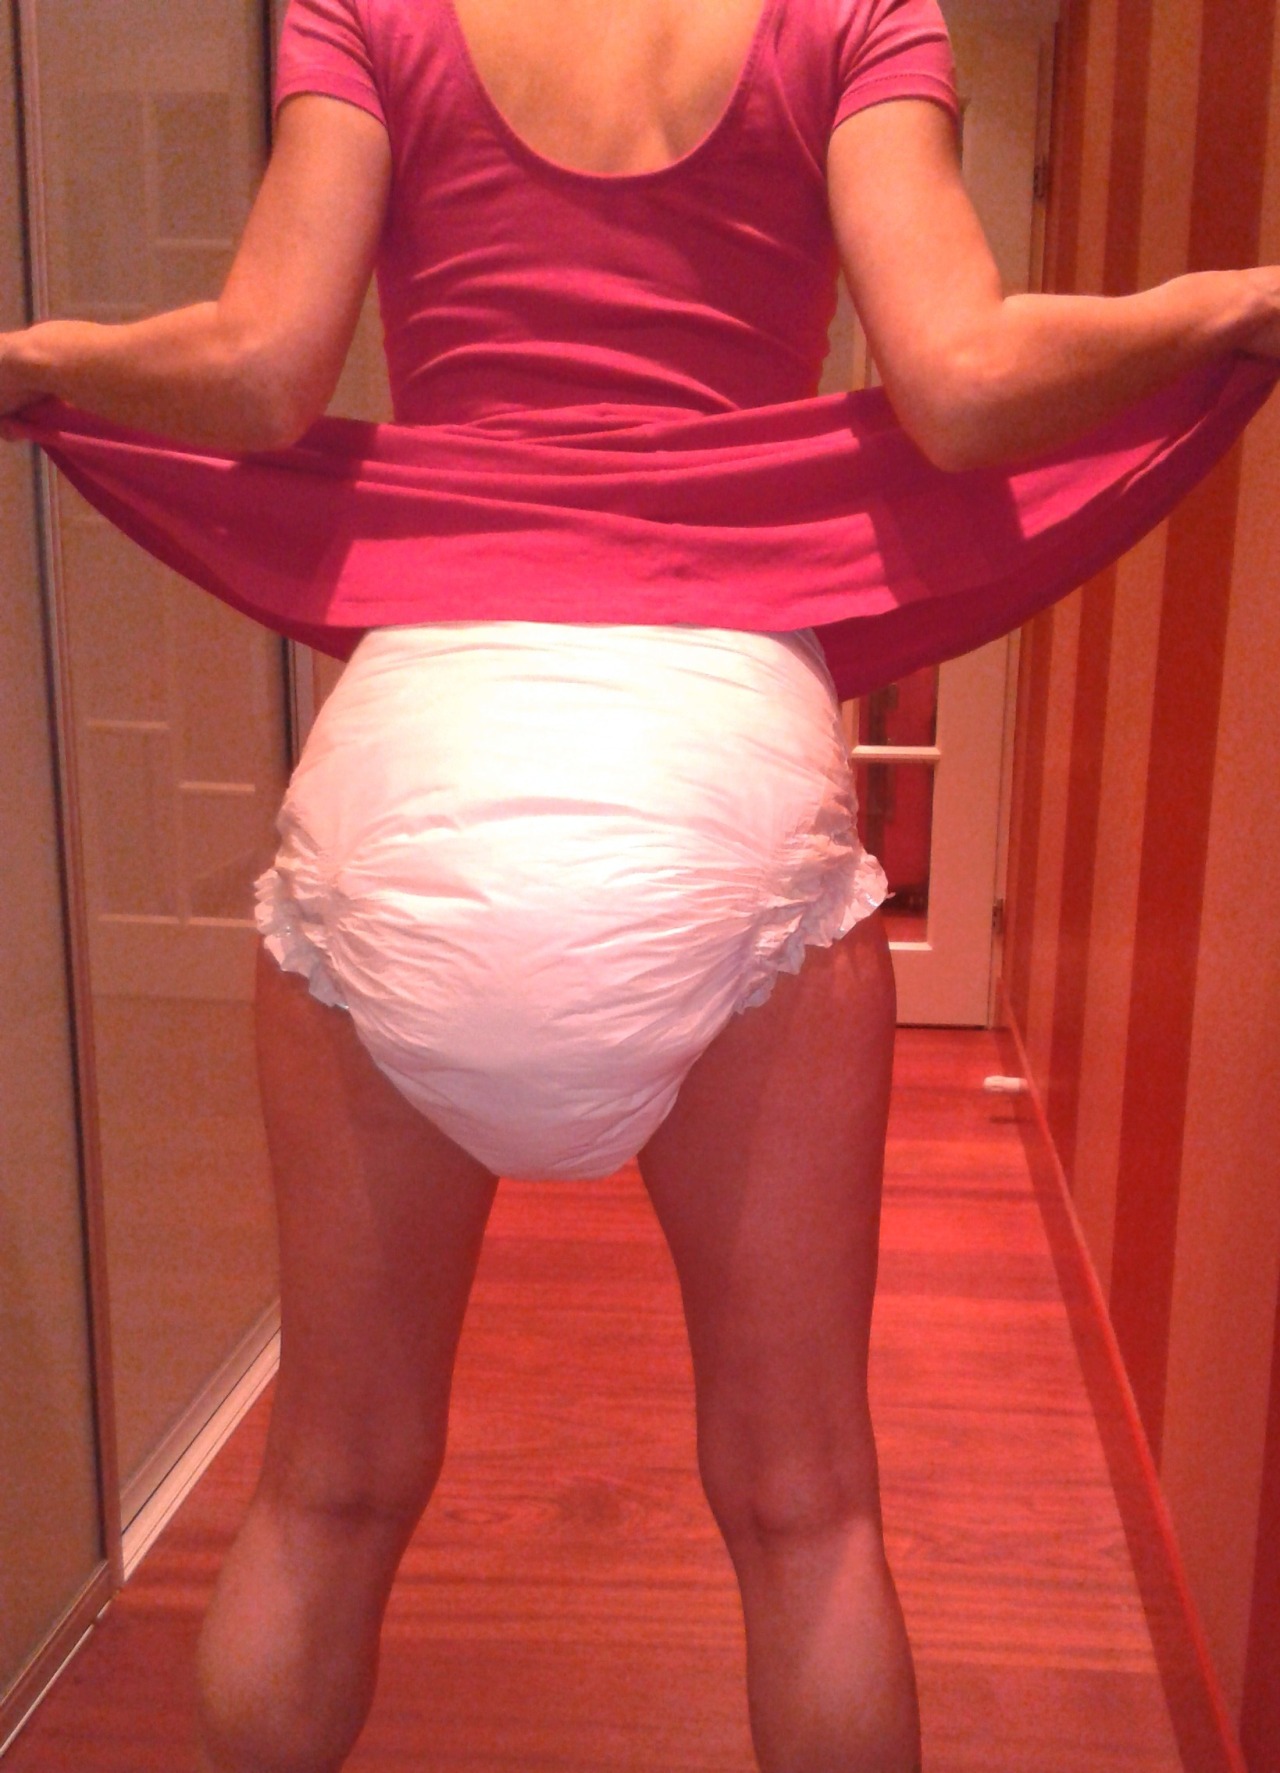 HEY THAT’S ME: EMMA!In the superthick diaper. I’m not the other girl ;-)